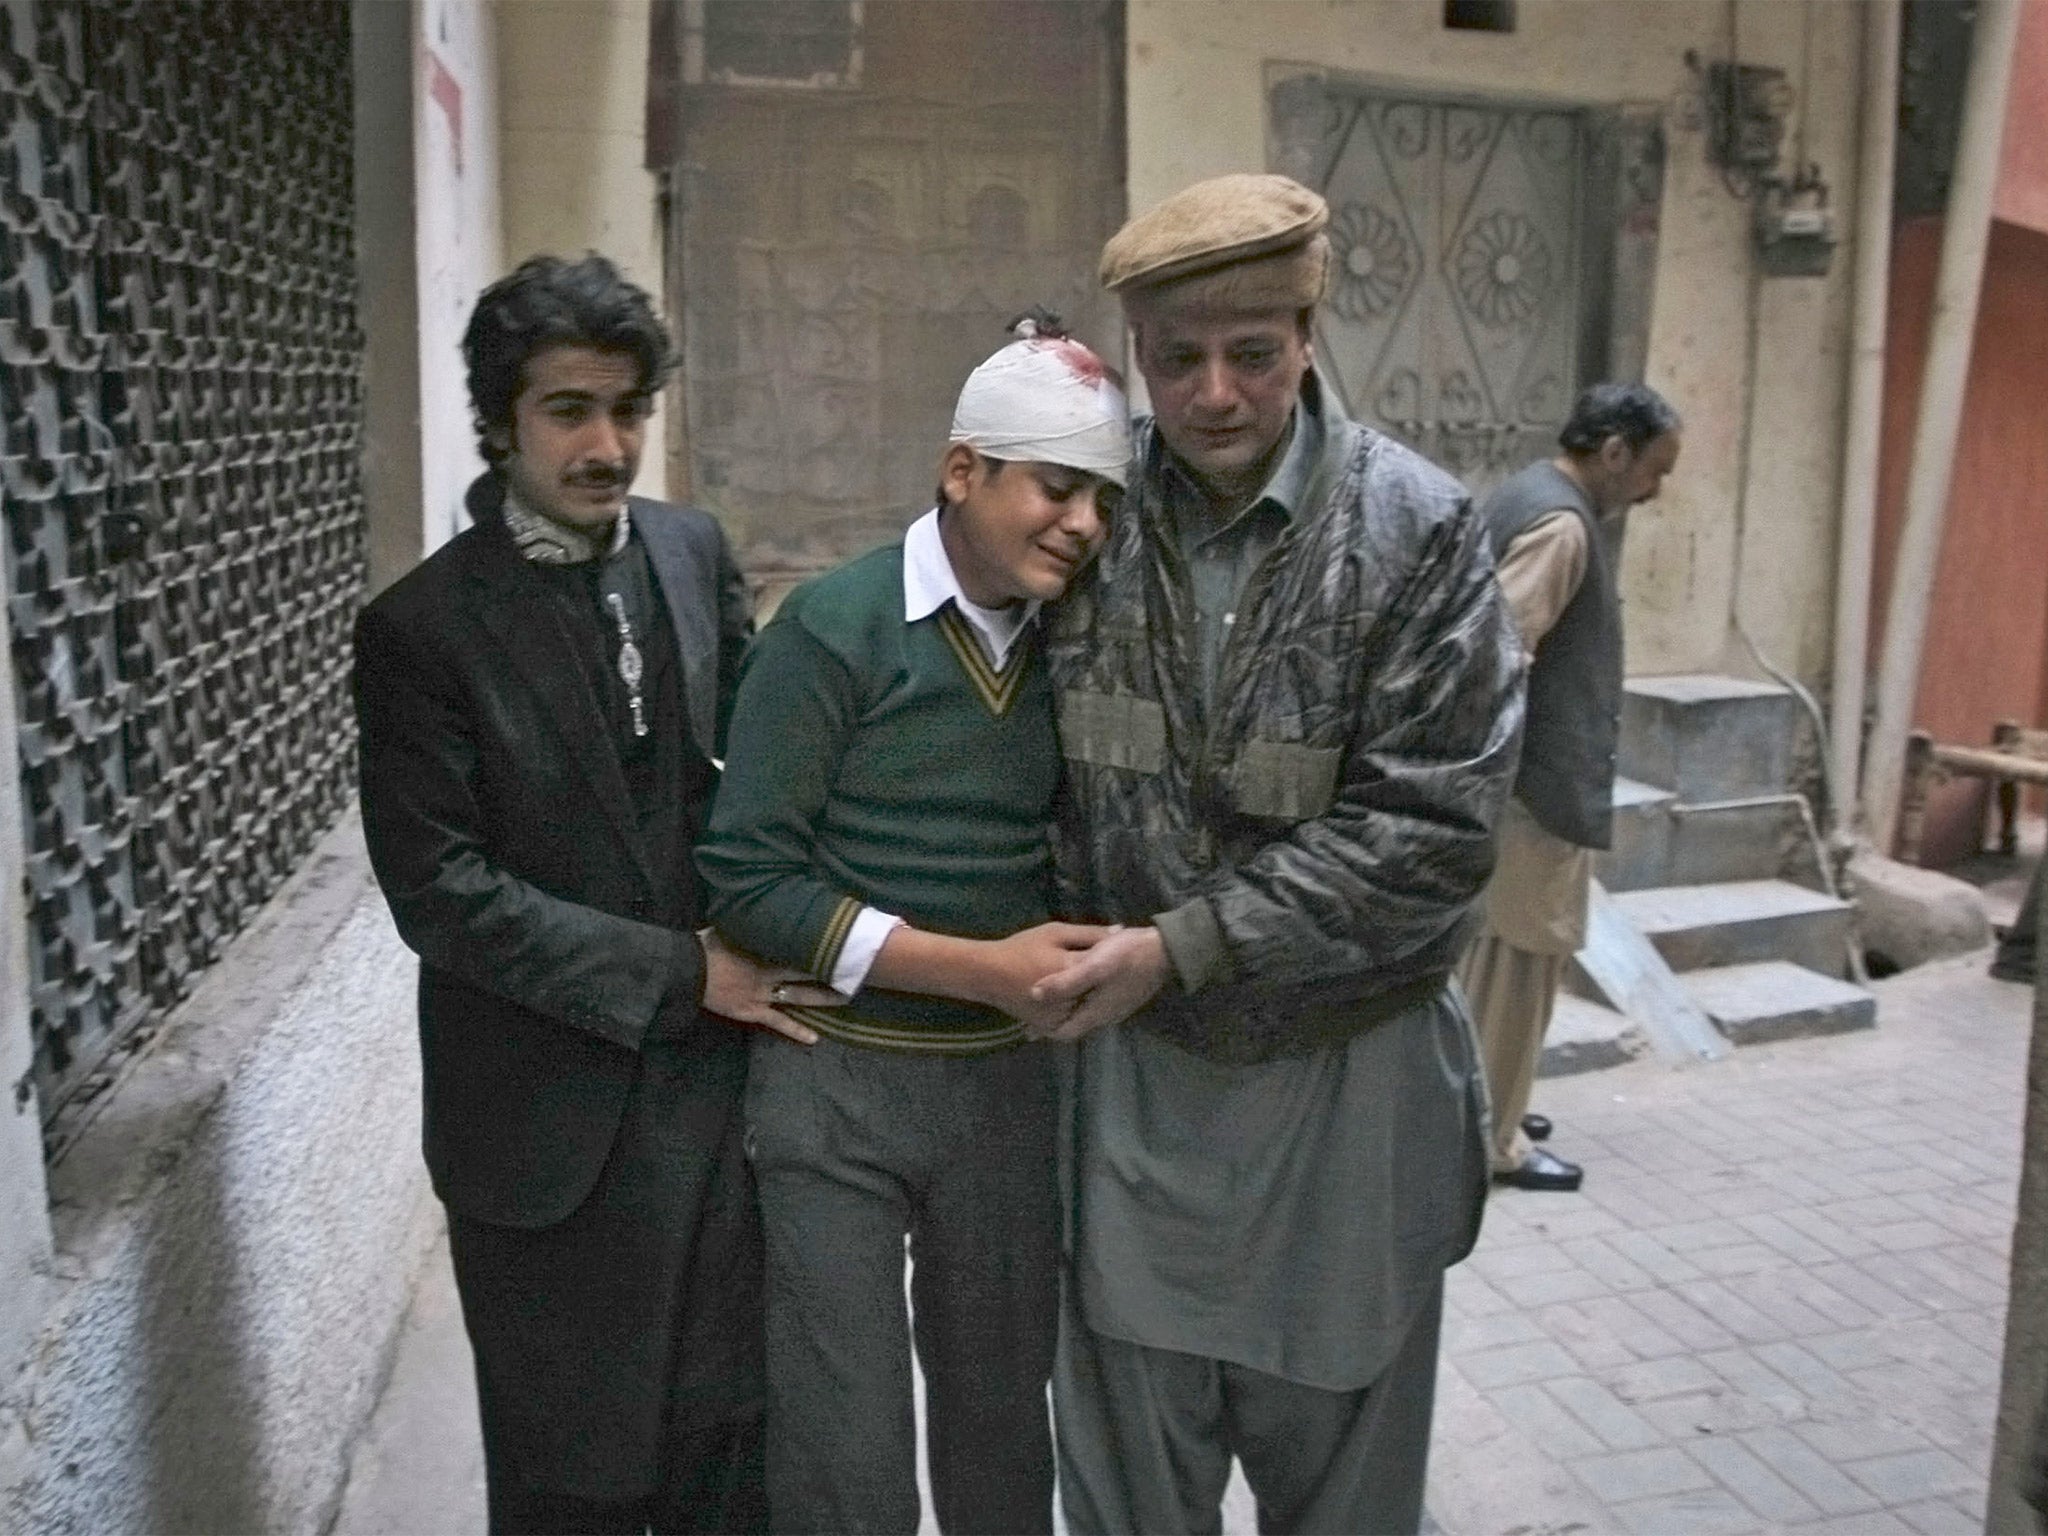 The uncle and cousin of injured student comfort him as he mourns the death of his mother who was a teacher at the school which was attacked by Taliban